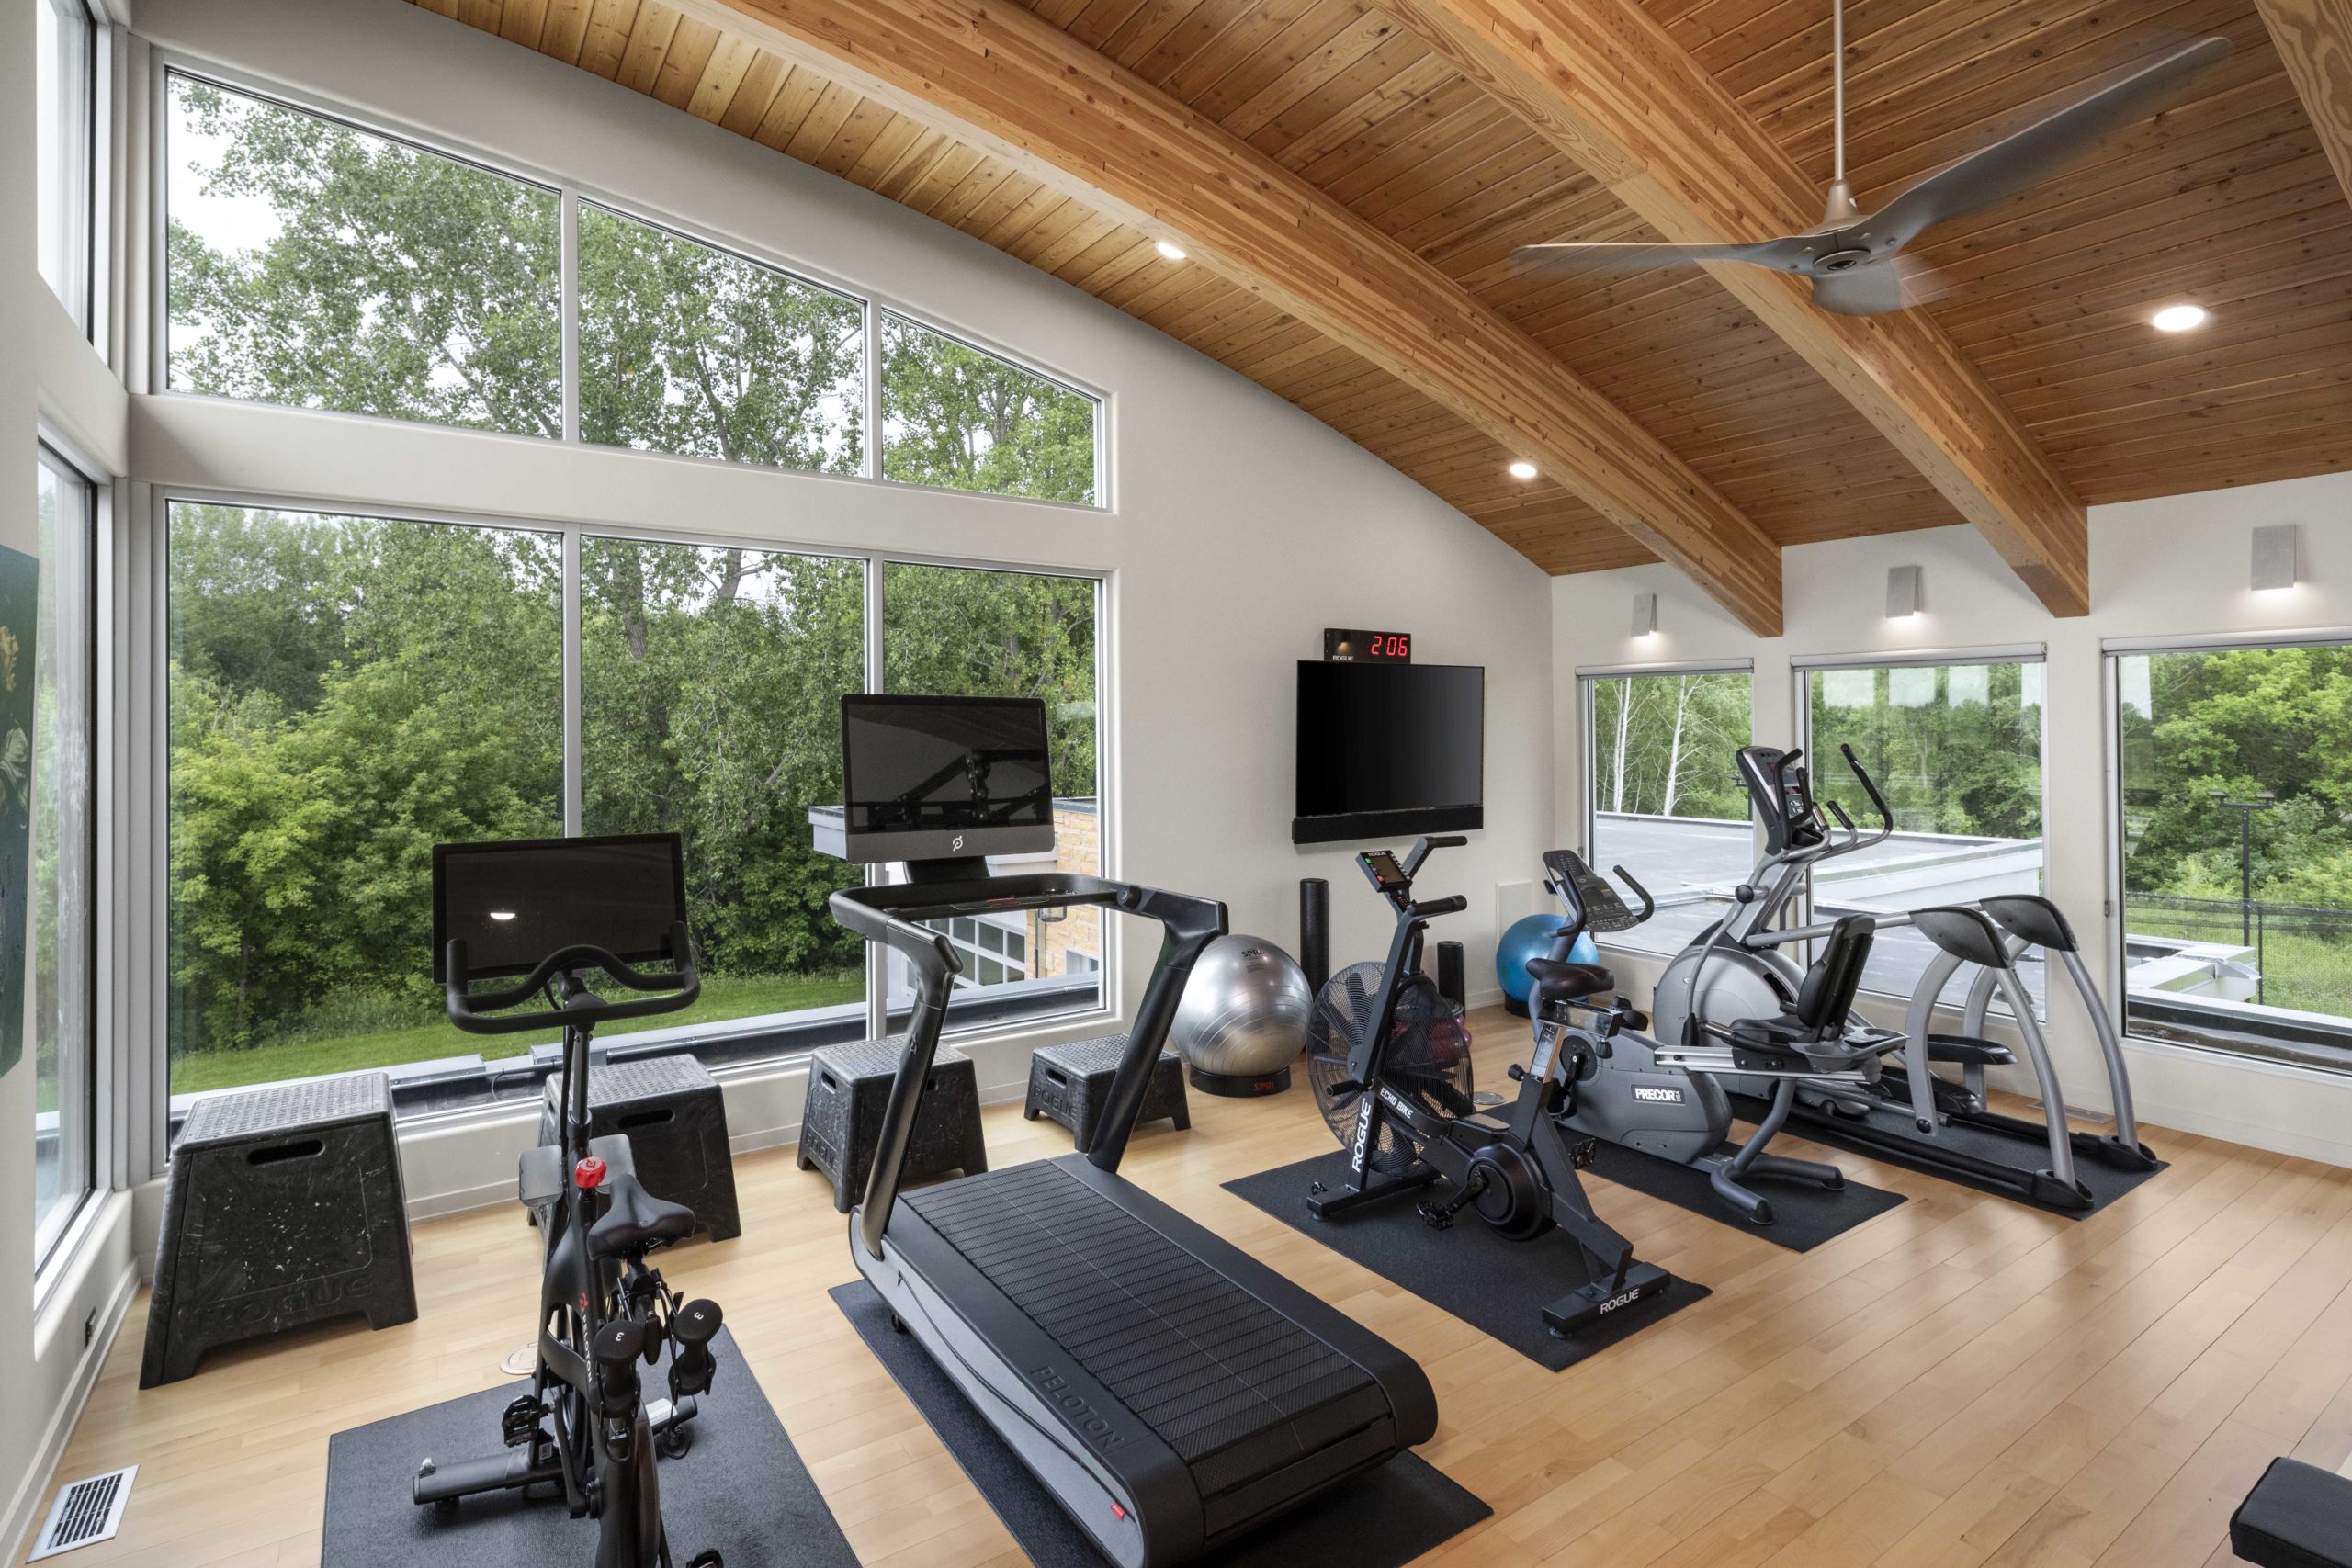 A contemporary gym room with exercise equipment and a large window.